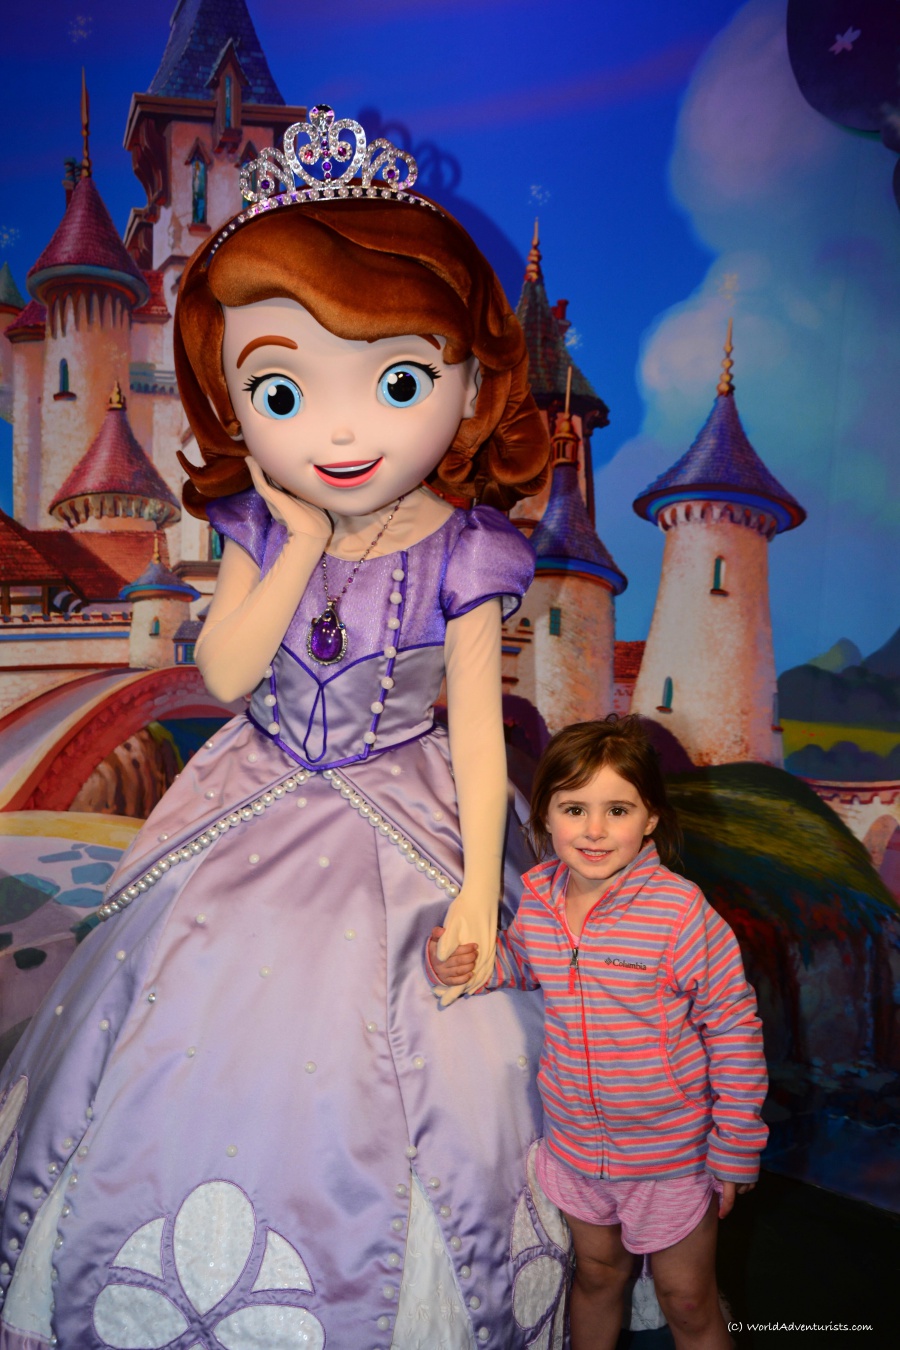 Sofia the first at Disney's Hollywood Studios